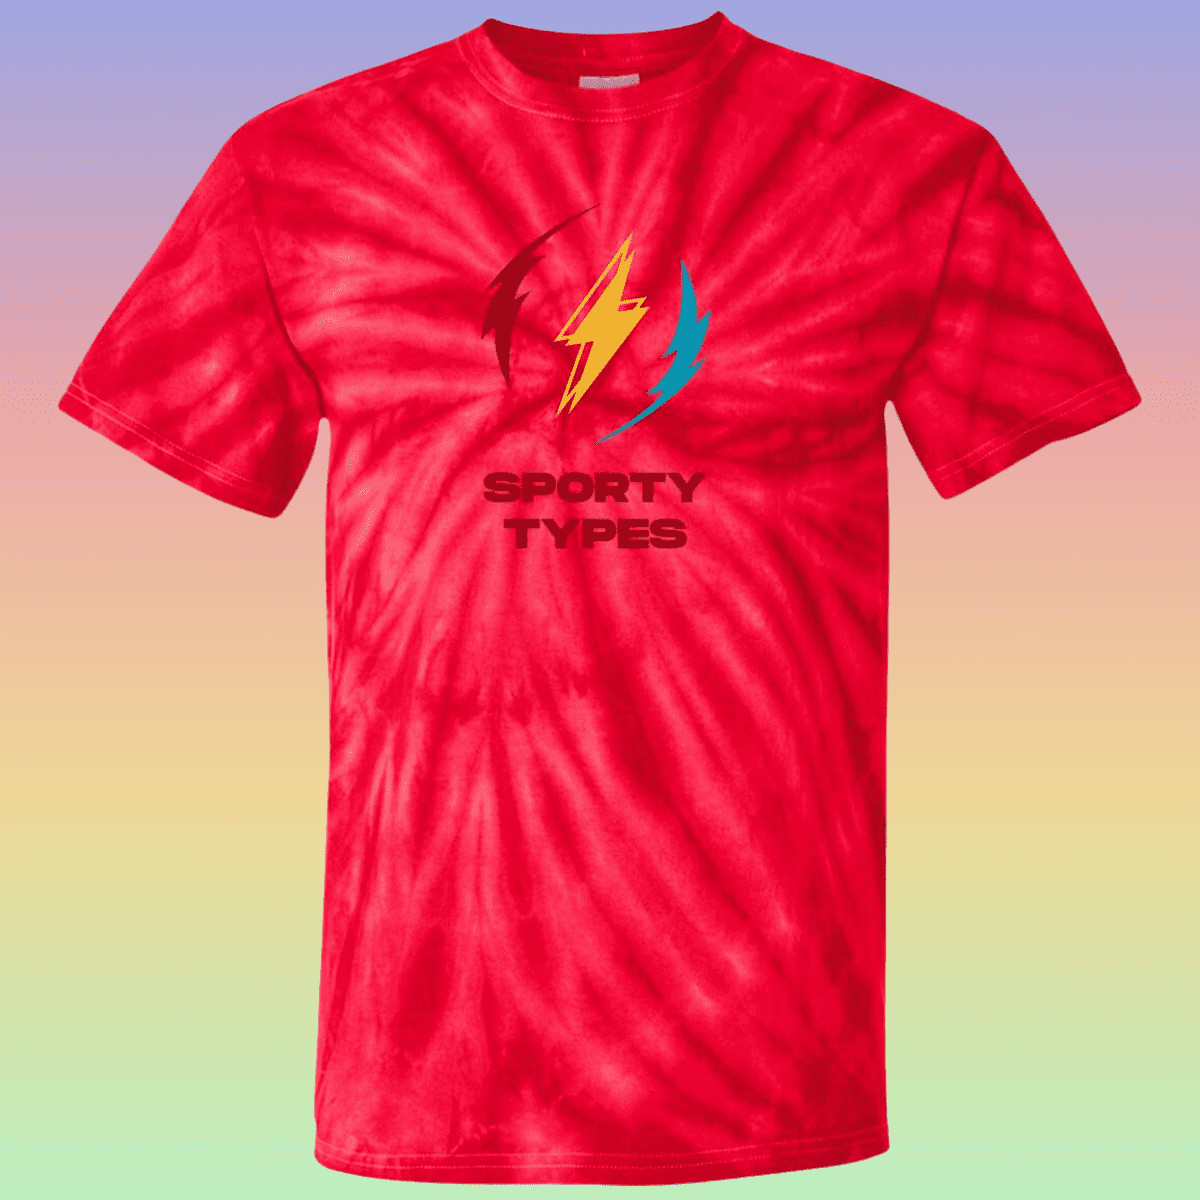 Youth Red Sporty Types Tie Dye T-Shirt